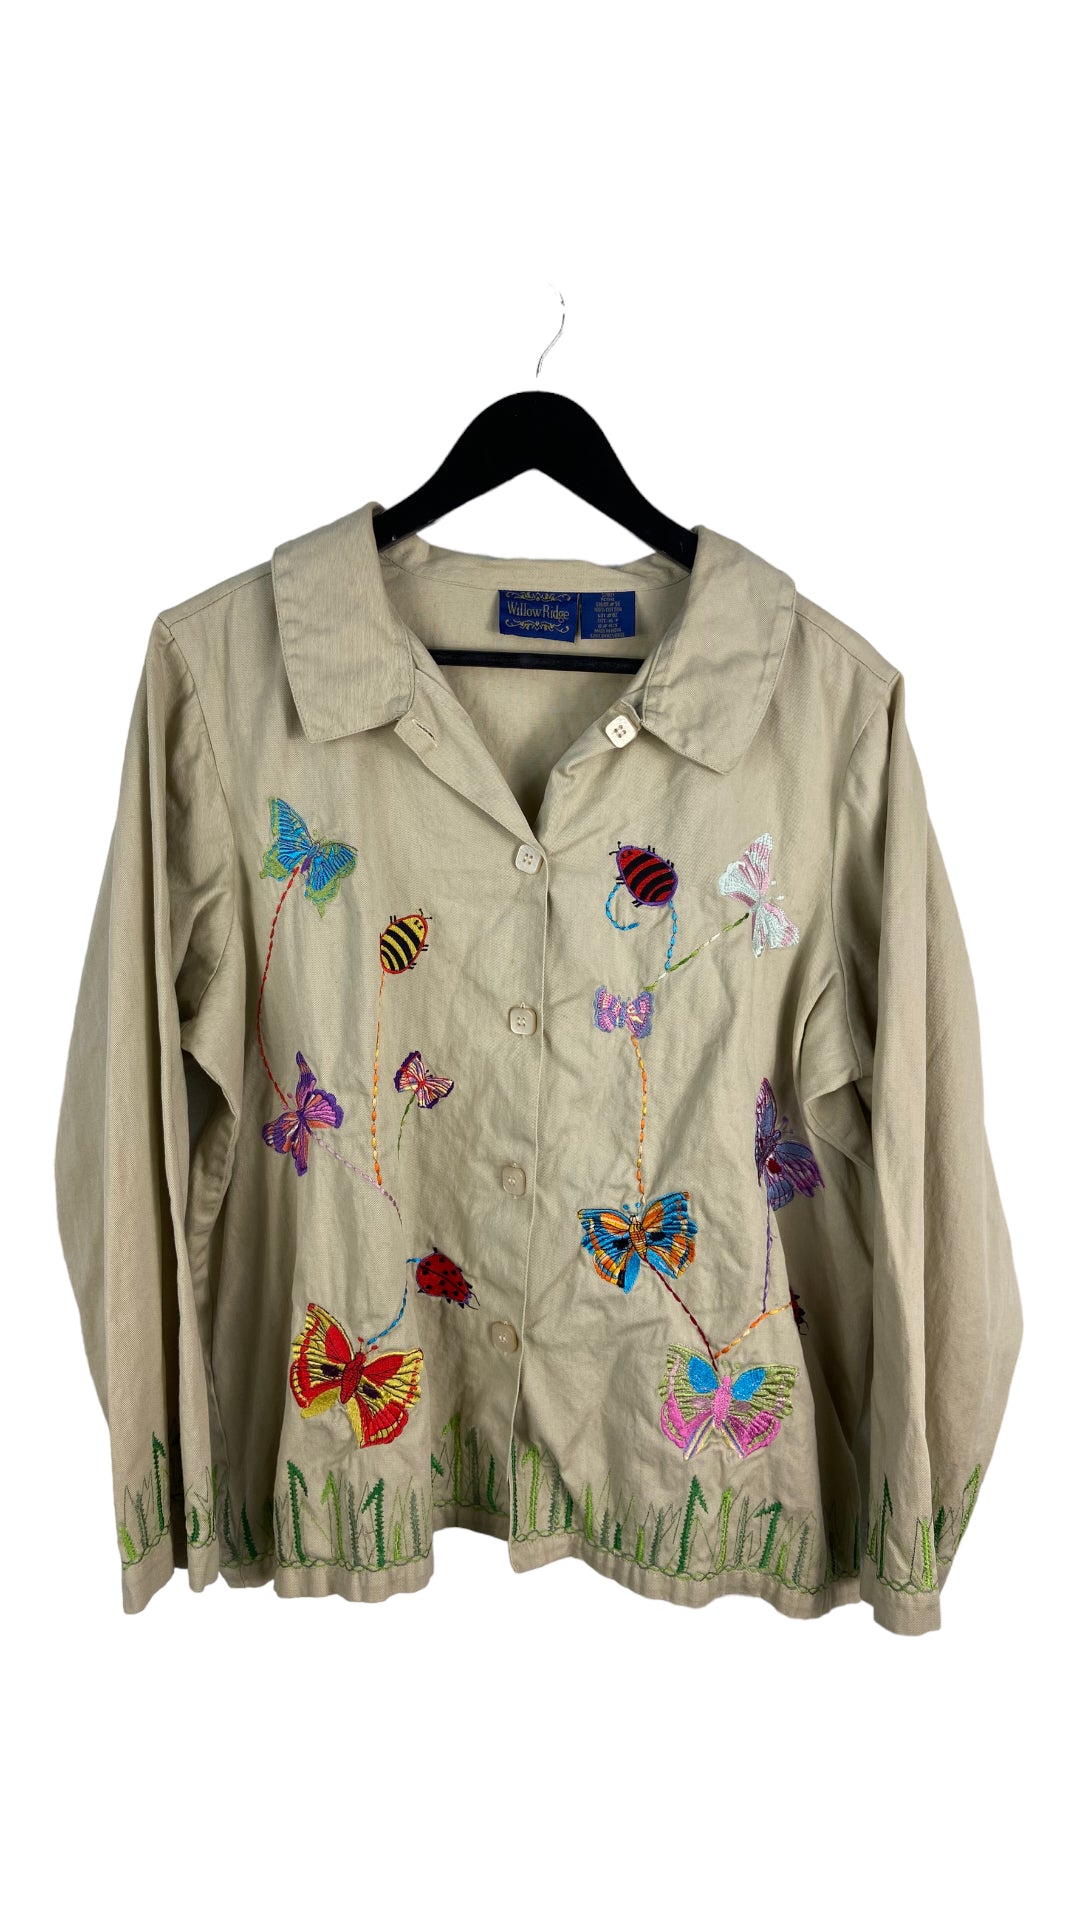 VTG Willow Ridge Embroidered Bugs Button Up Shirt Sz L